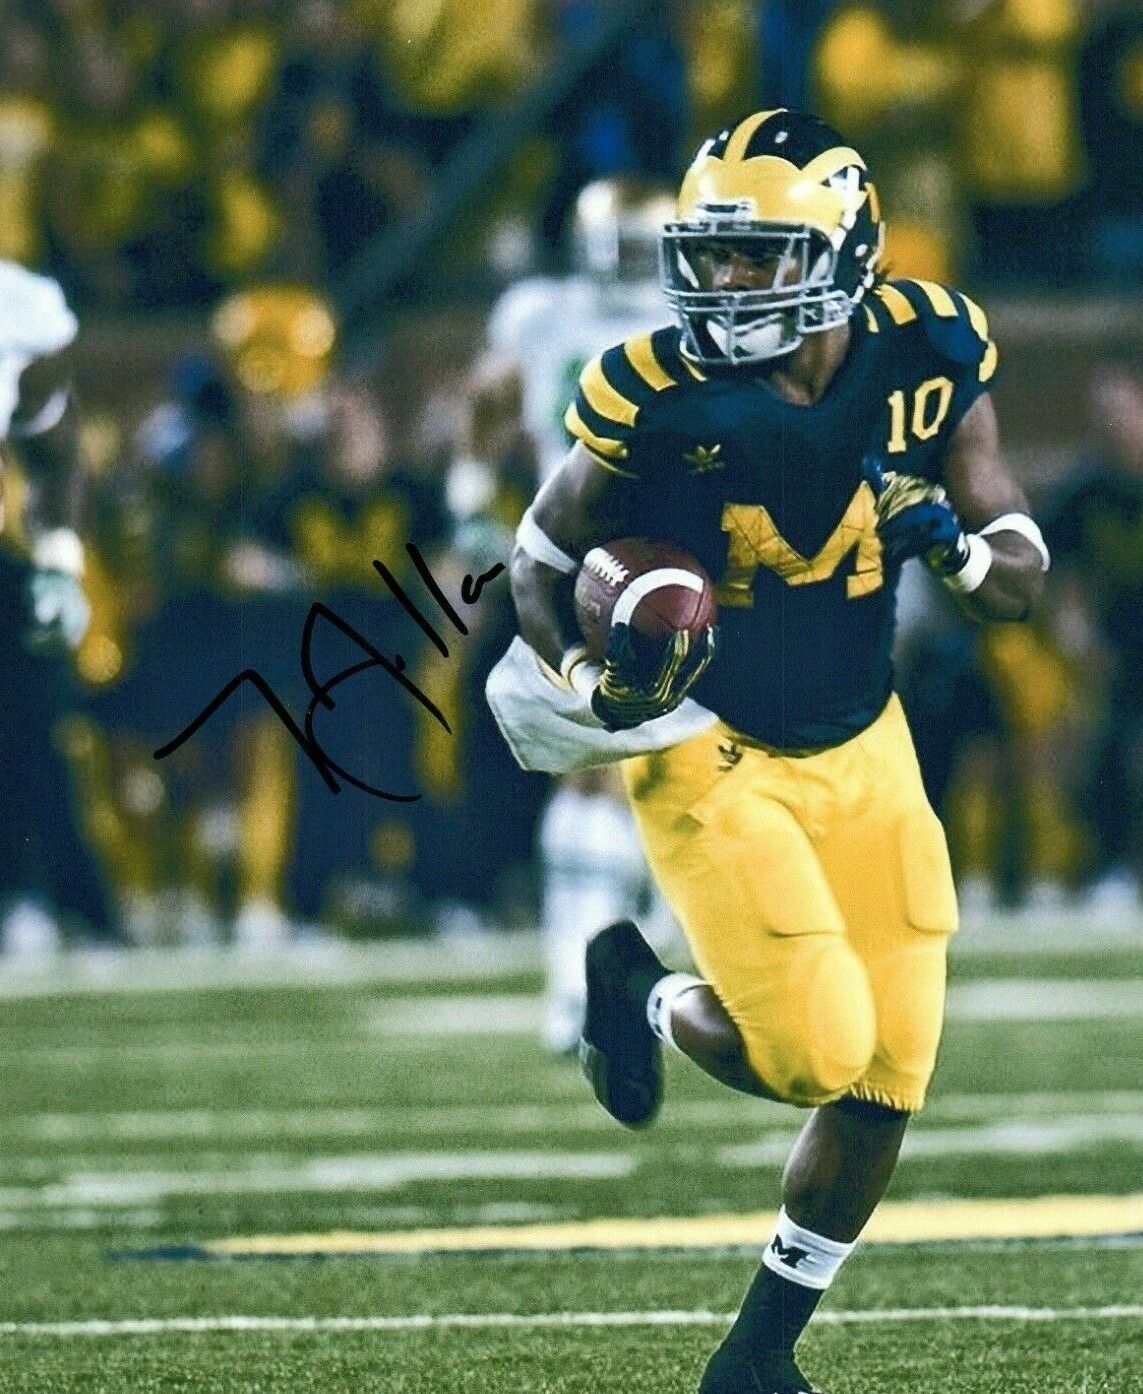 Jeremy Gallon Michigan Wolverines Signed 8x10 Photo Poster painting Autographed COA 3